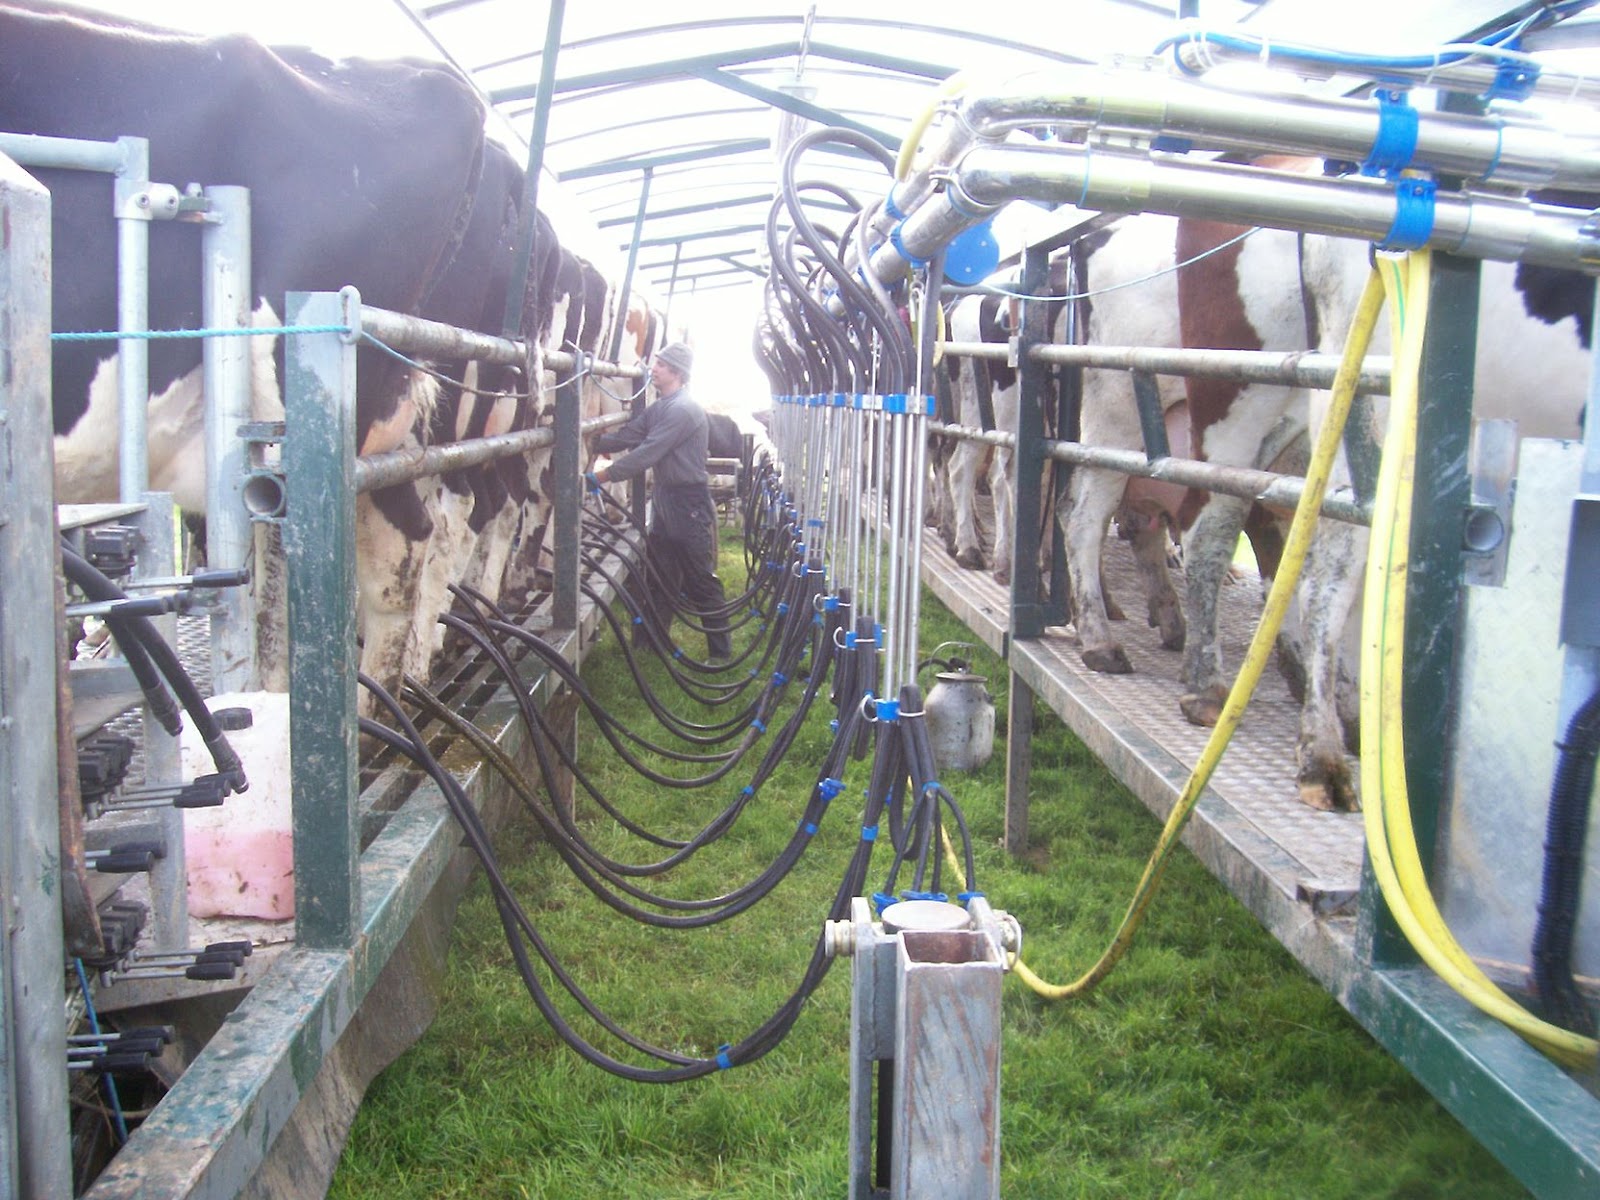 Milking on the Moove by Glen Herud: The Mobile Milking System